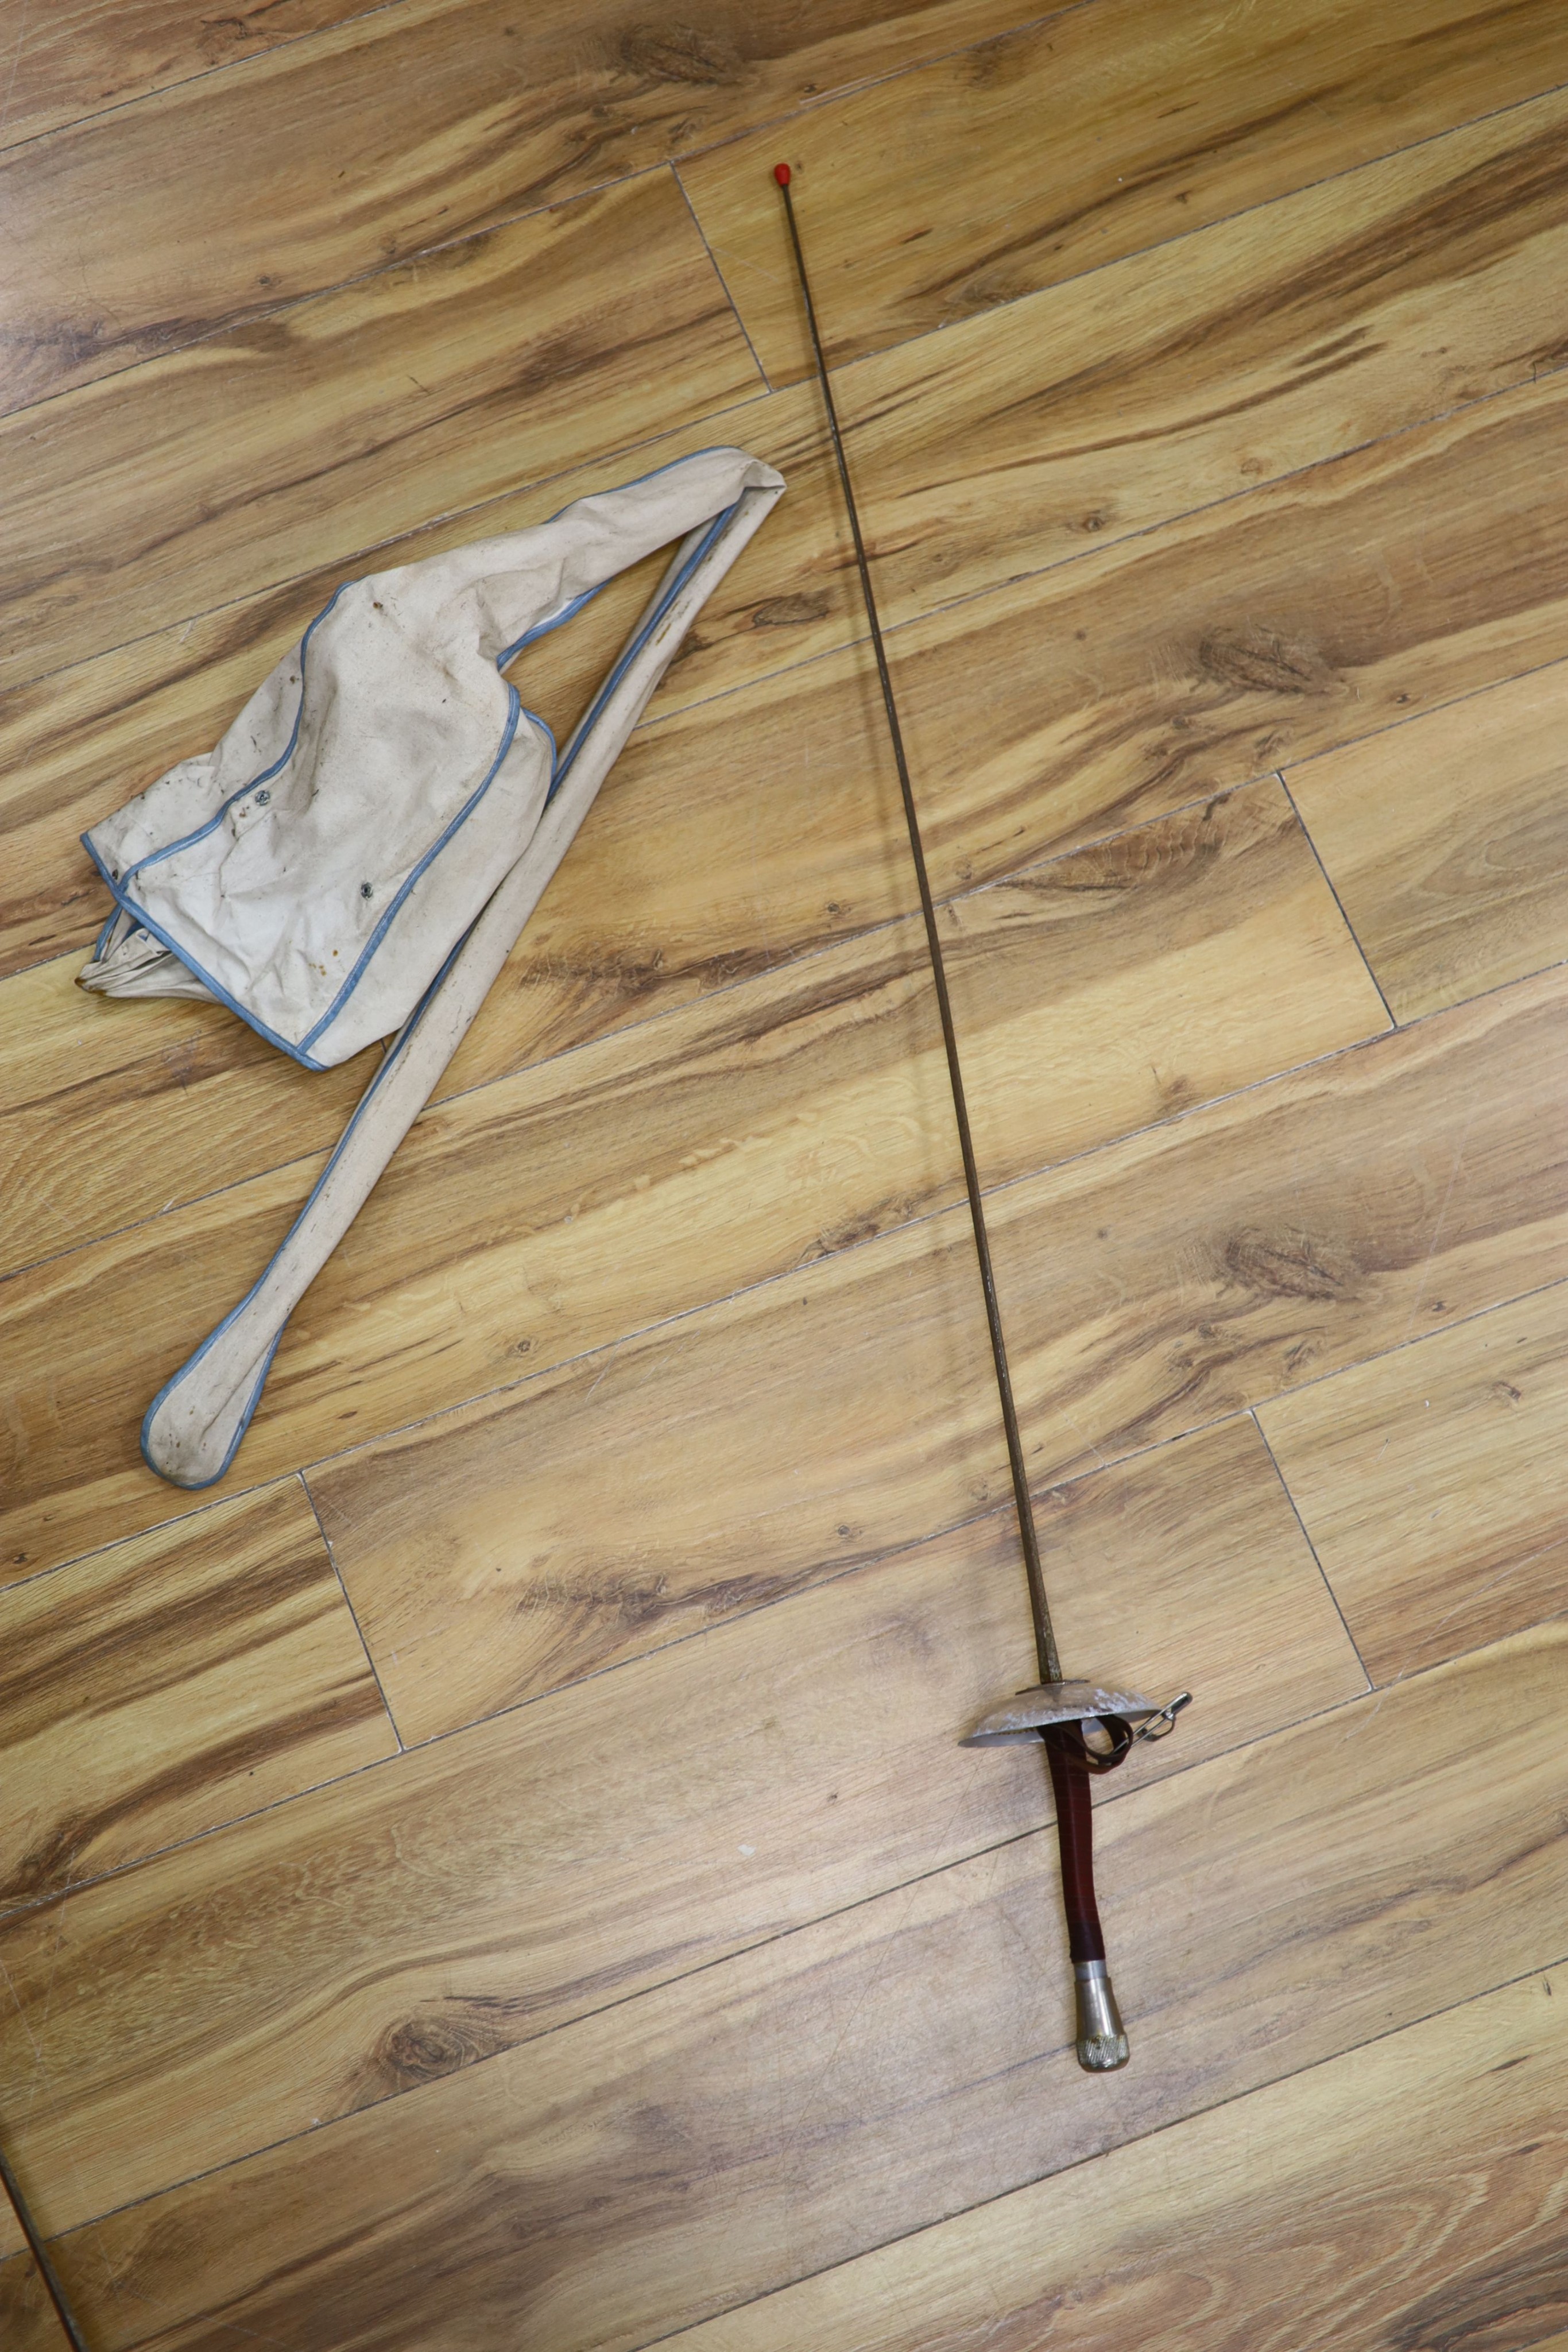 A fencing foil and accessories